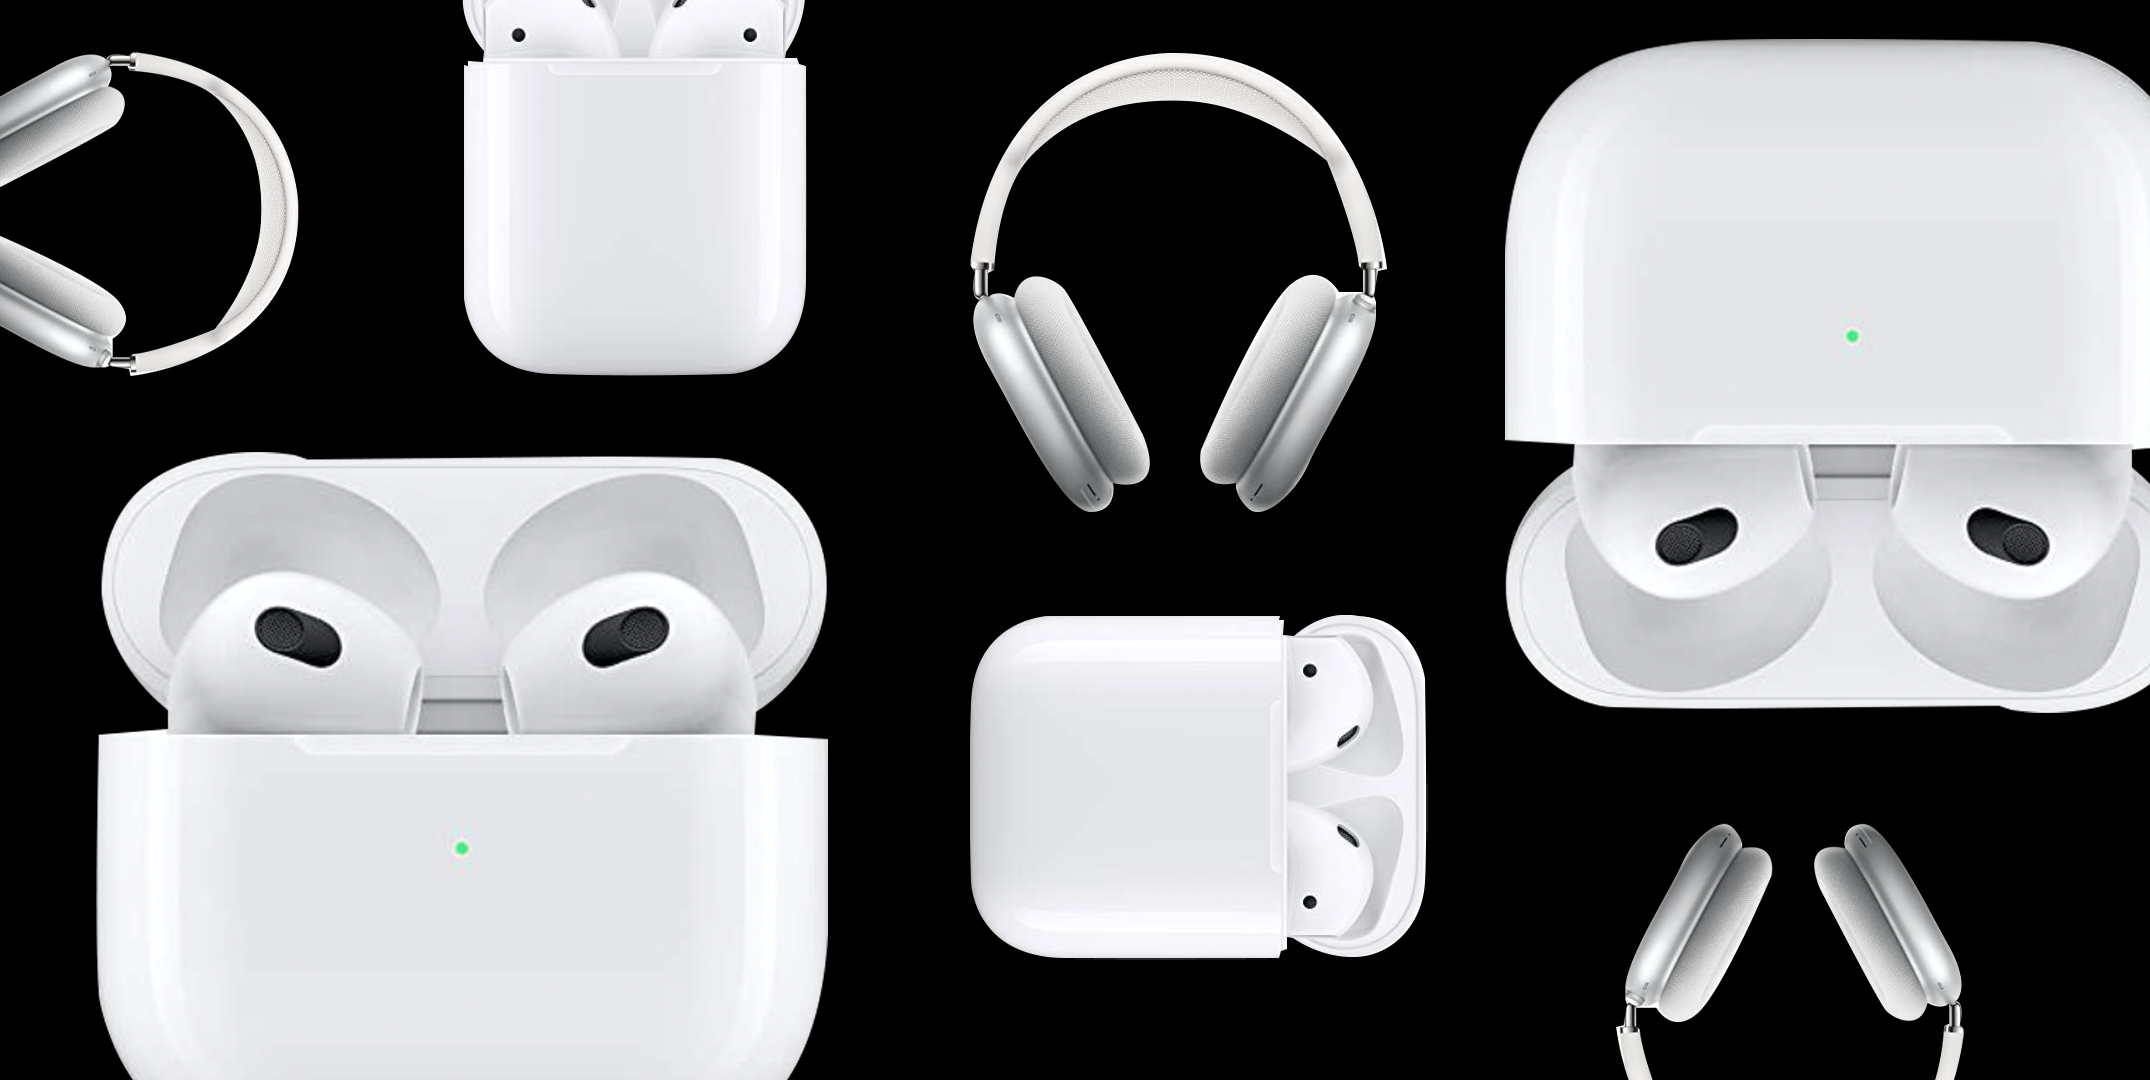 stomach Warmth Adaptability 4 Apple AirPods Deals to Shop on Amazon in 2023